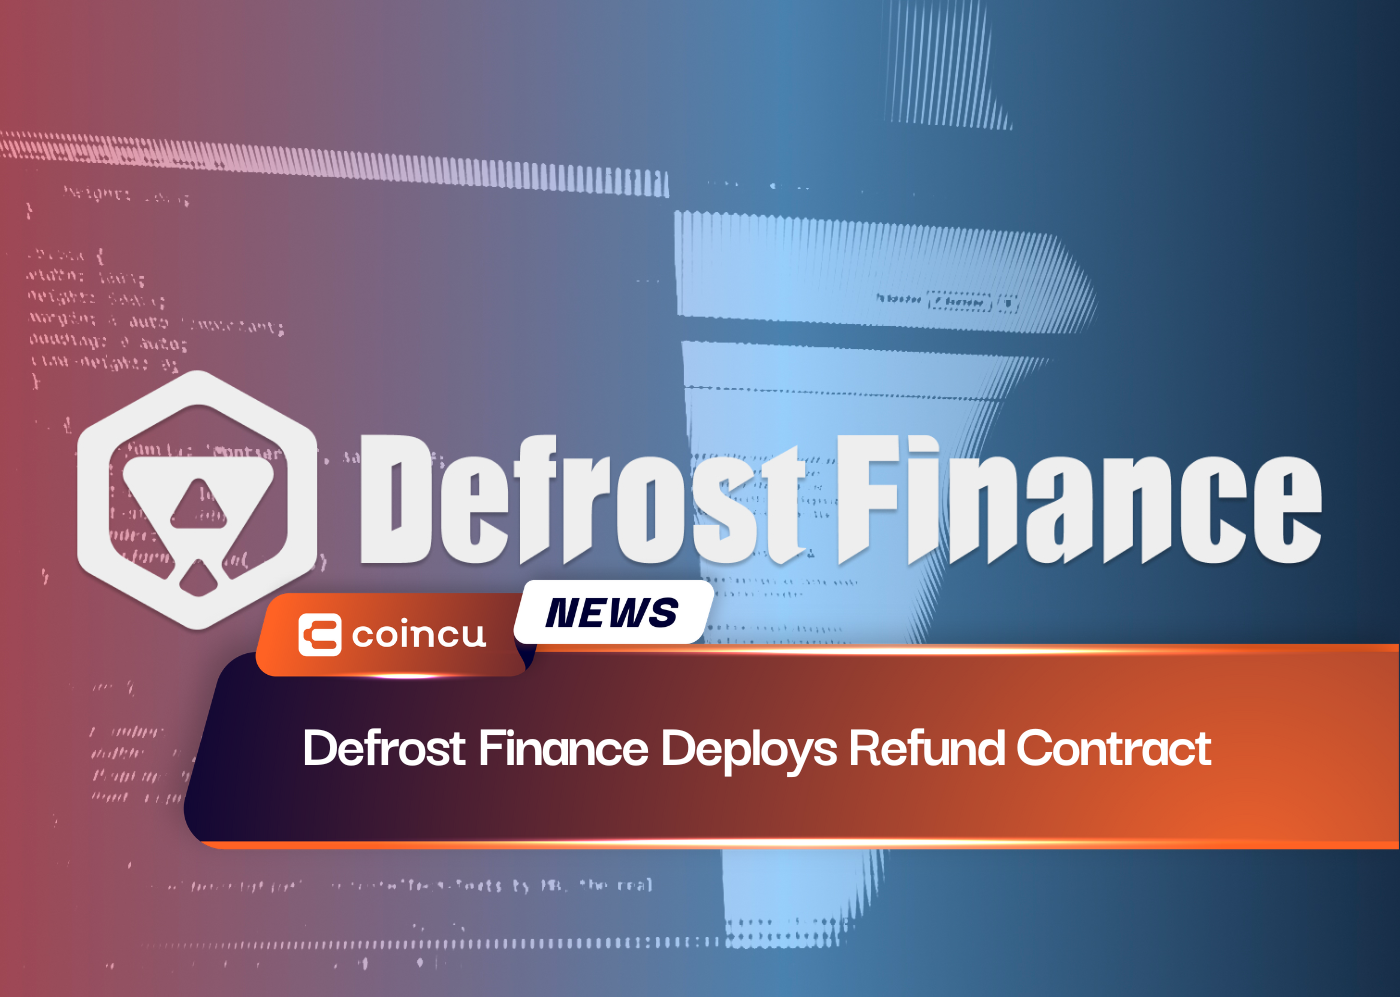 Defrost Finance Deploys Refund Contract